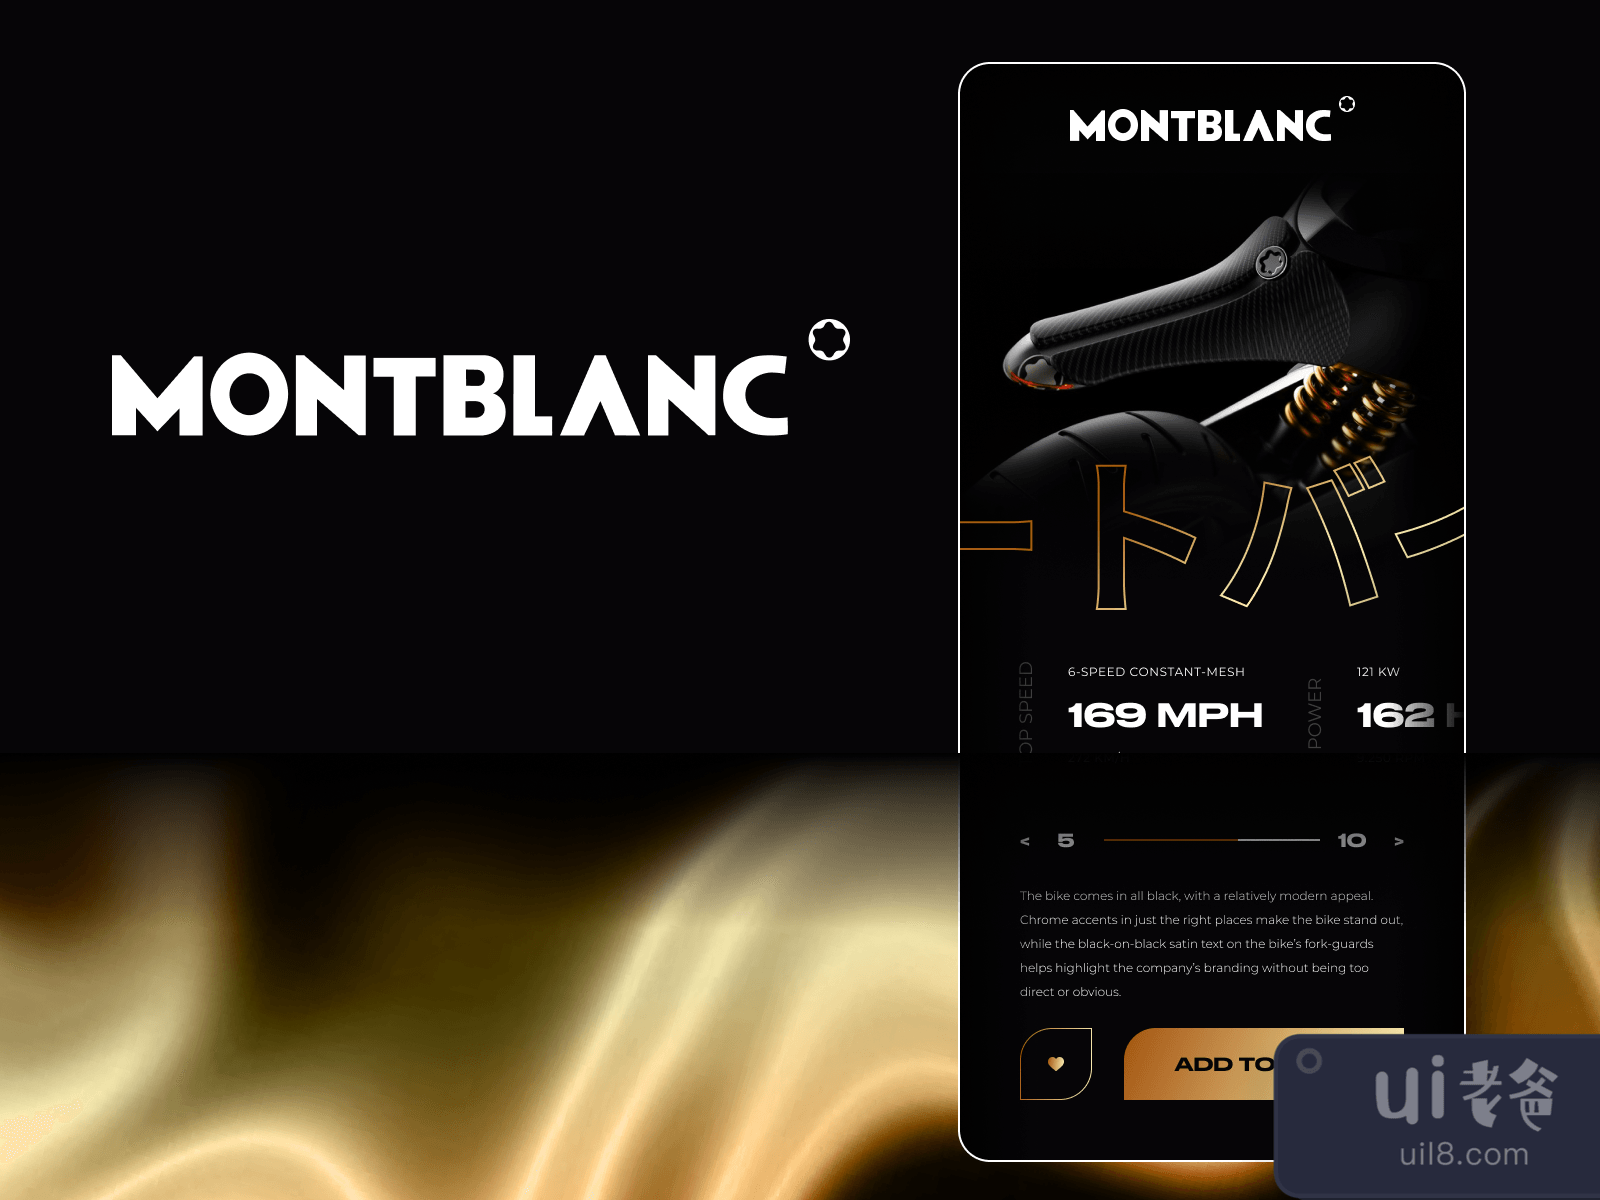 Montblanc  Motorcycle Mobile App for Figma and Adobe XD No 2